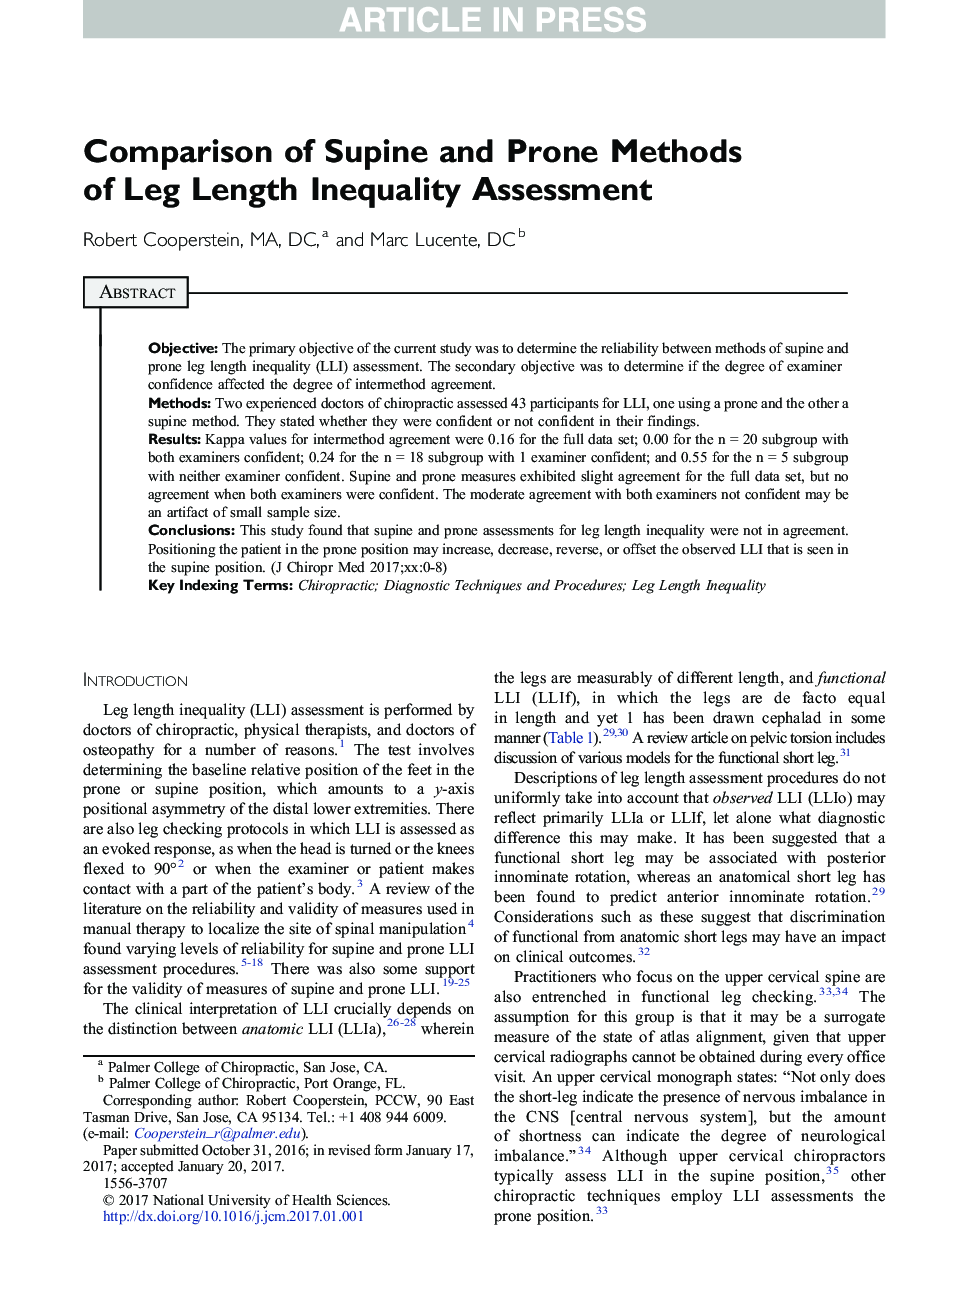 Comparison of Supine and Prone Methods of Leg Length Inequality Assessment